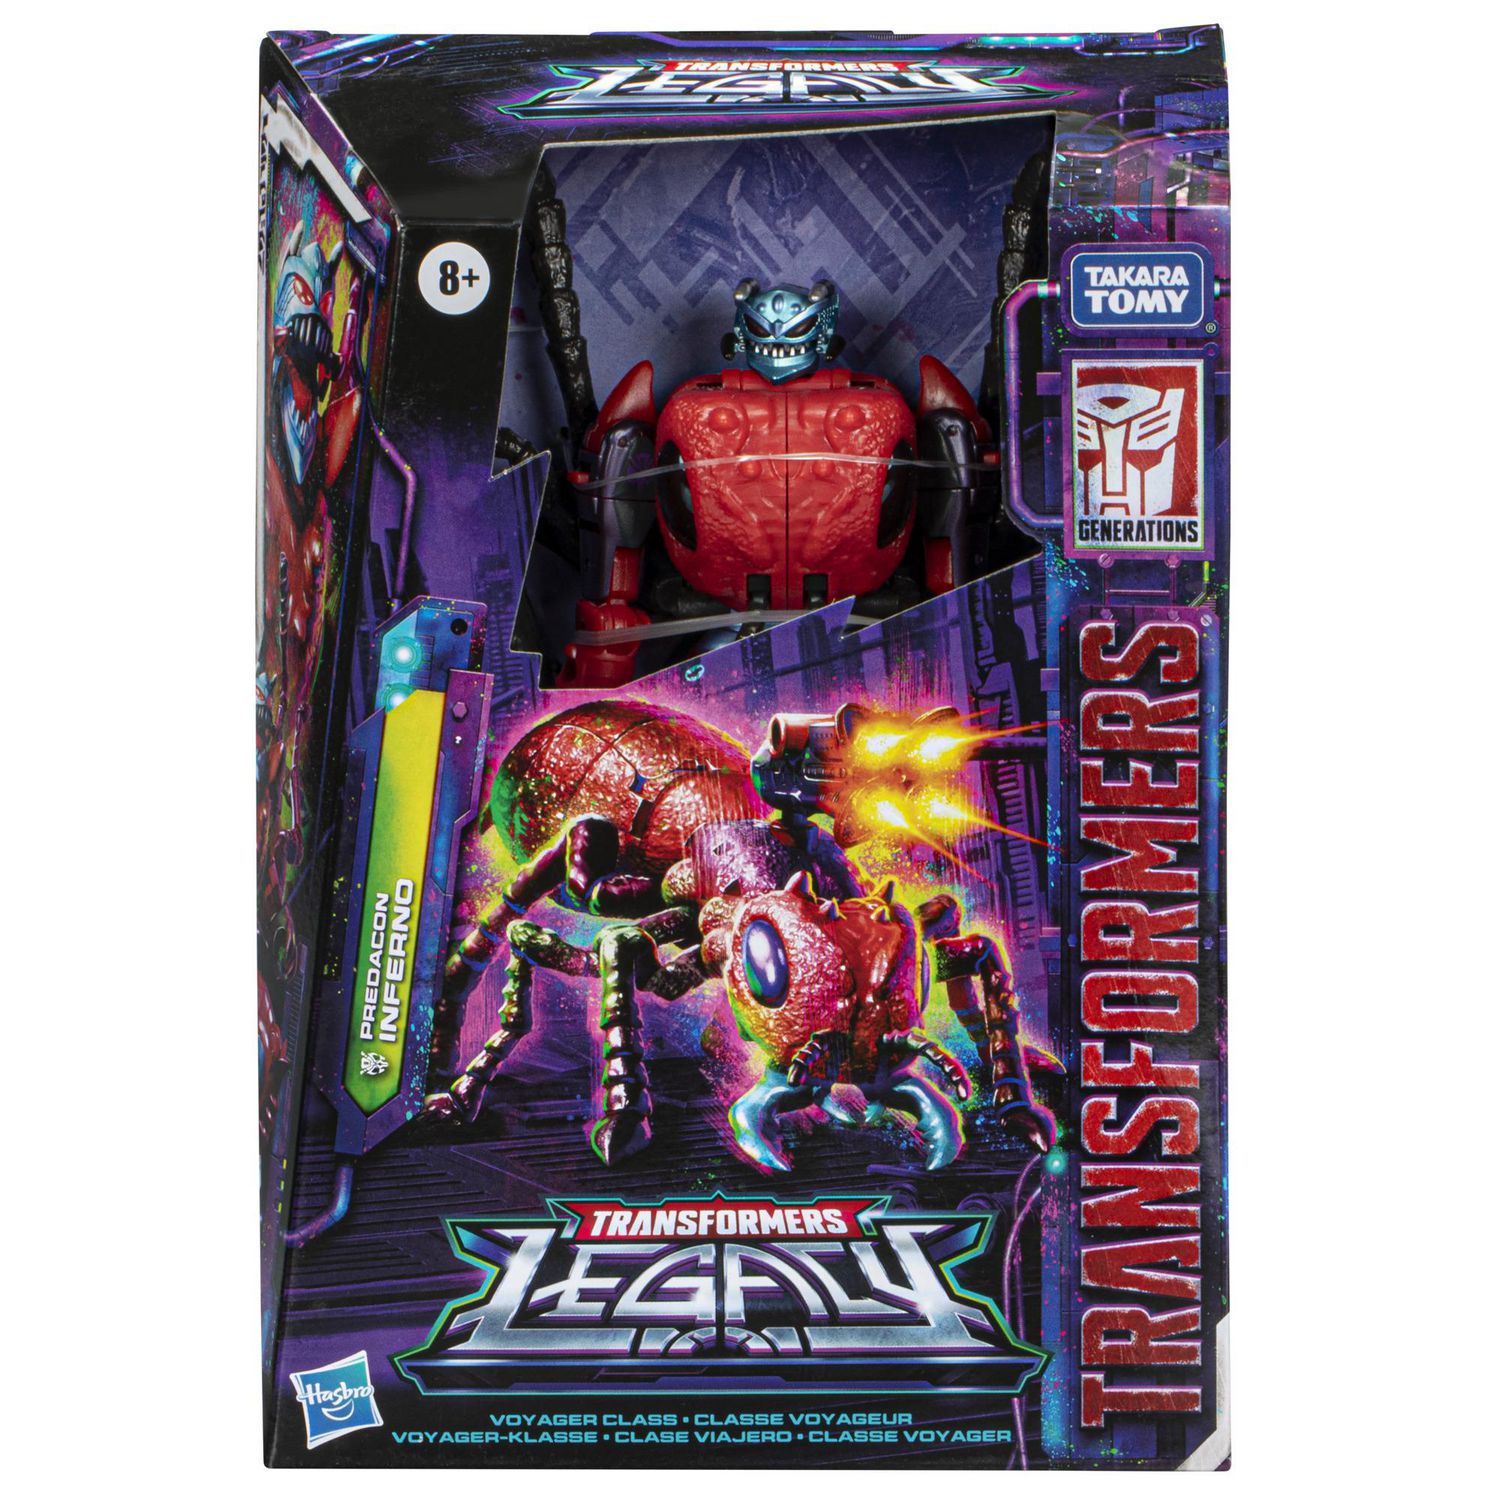 Transformers Toys Generations Legacy Voyager Predacon Inferno Action Figure  - Kids Ages 8 and Up, 7-inch